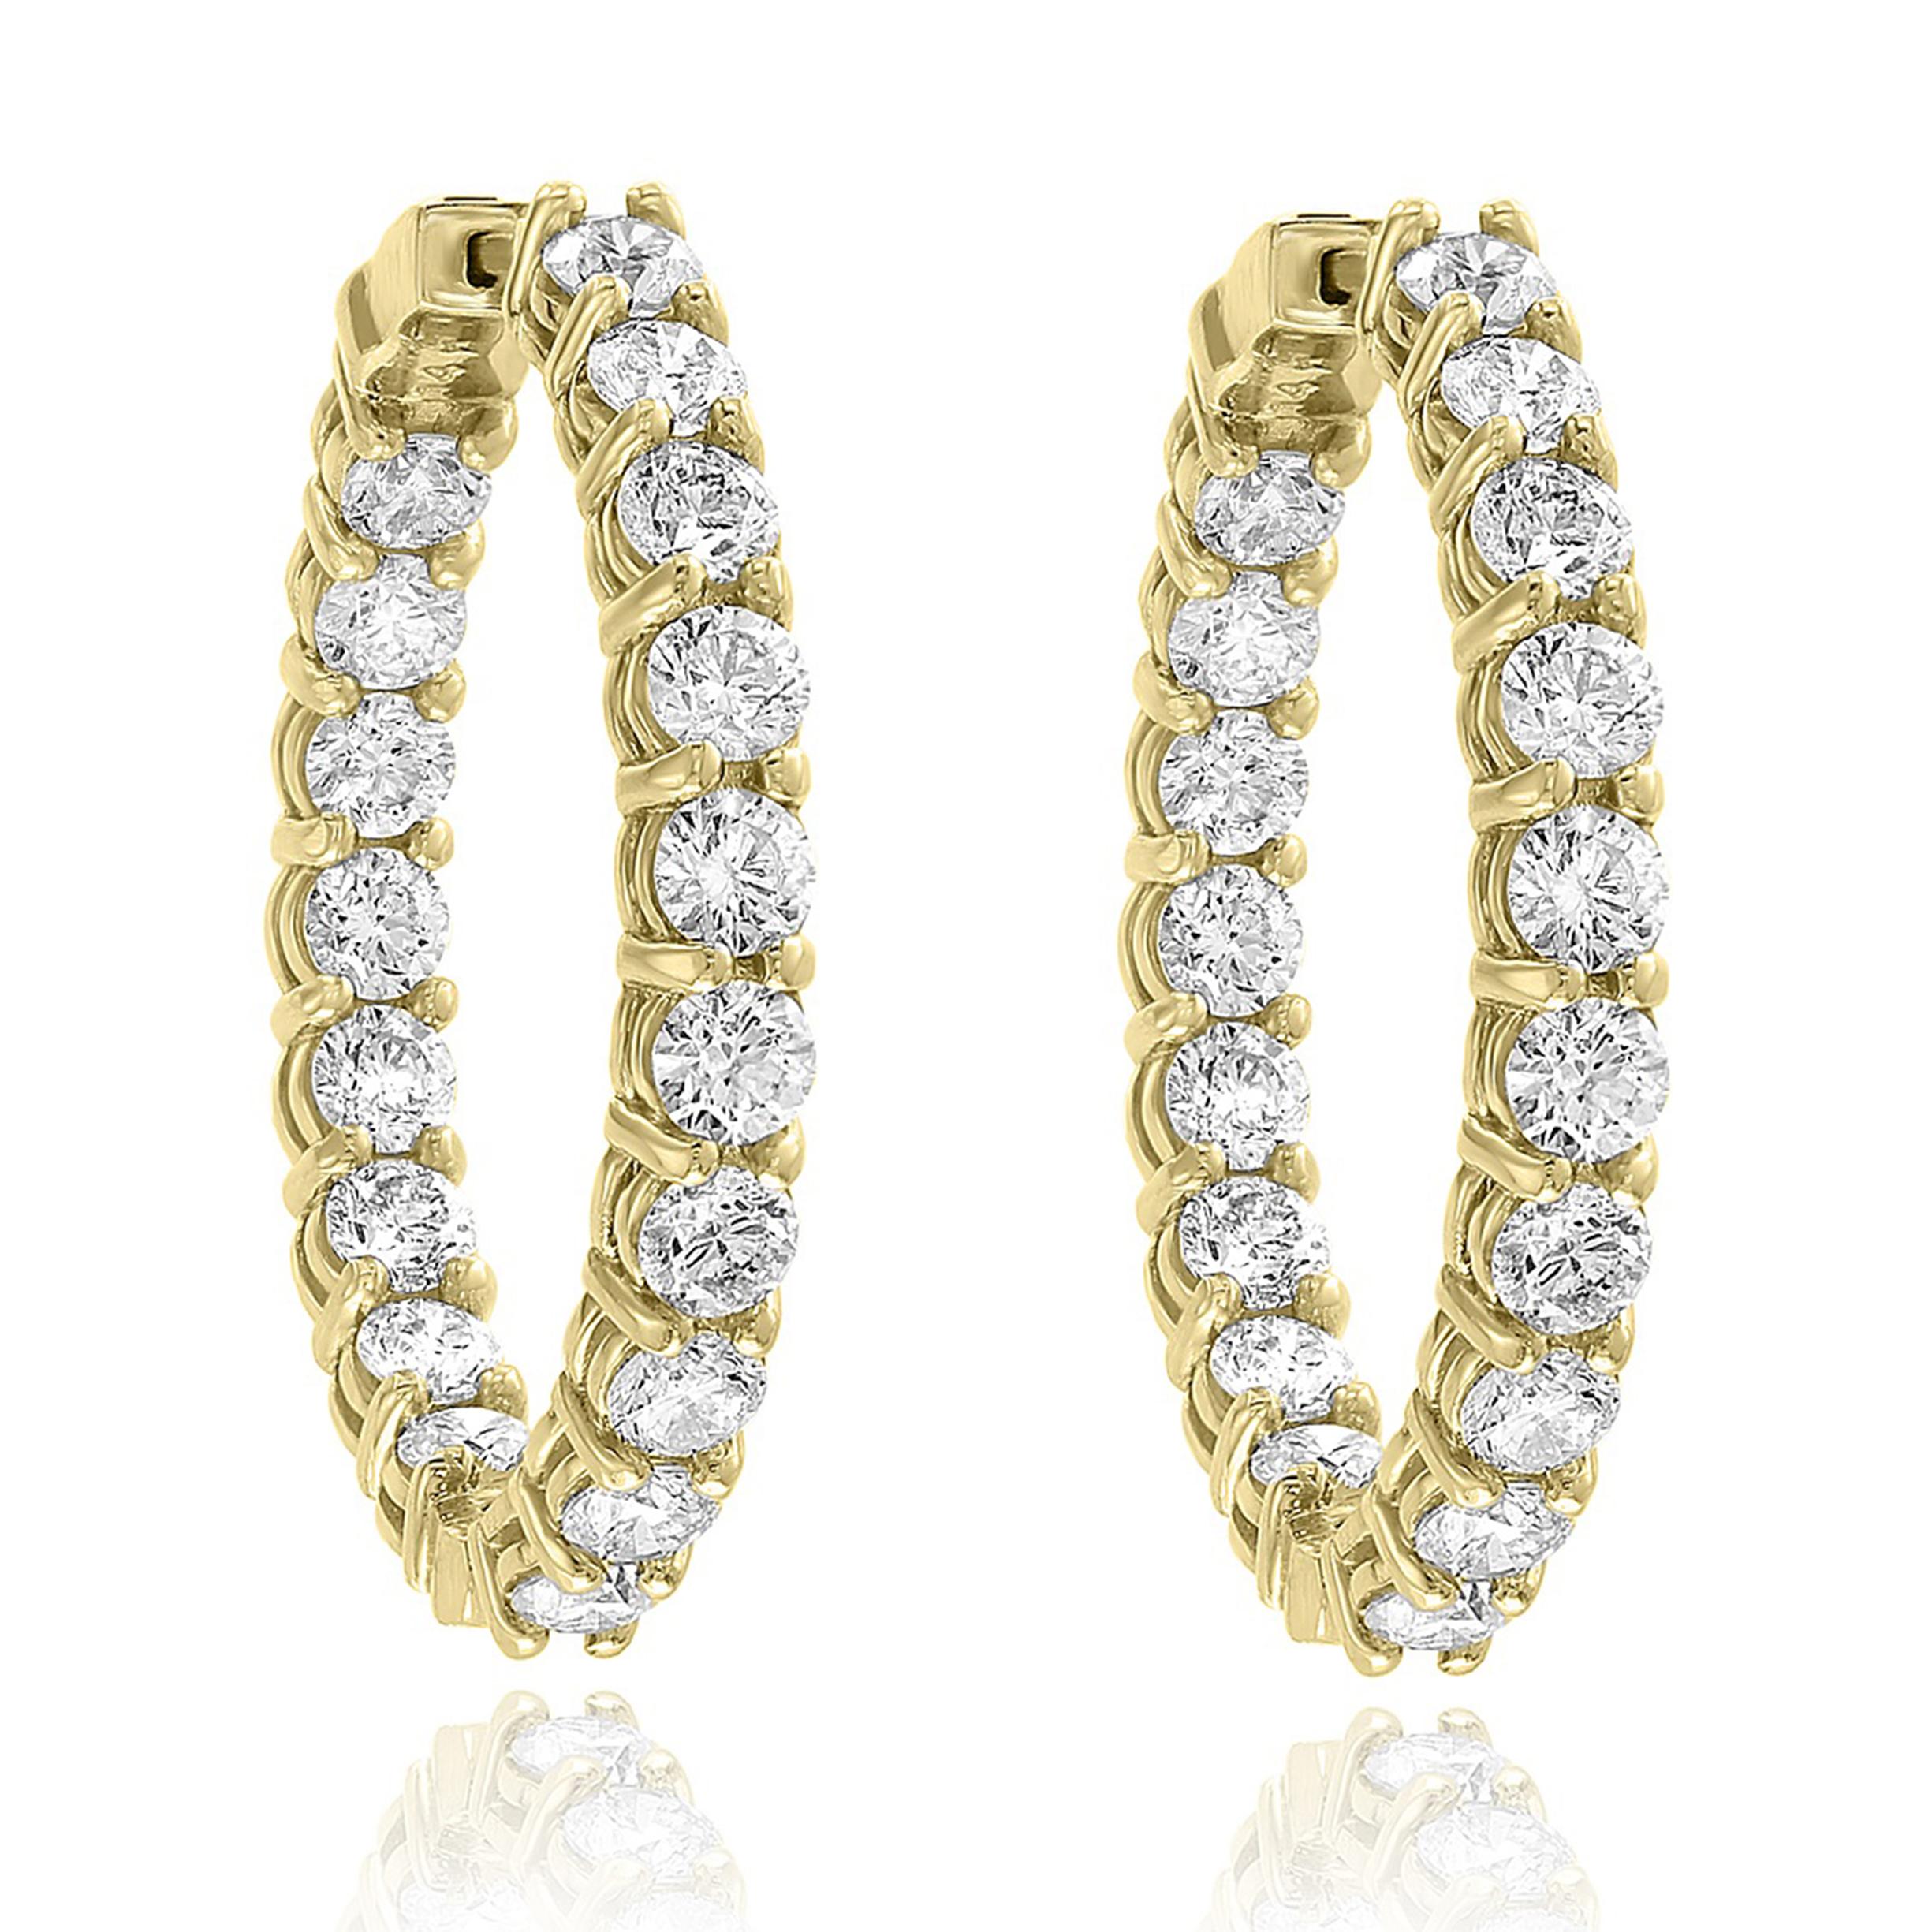 A chic and fashionable pair of hoop earrings showcasing  round diamonds, set in 14k yellow gold.  36 Round diamonds weigh 5.10 carats total. A beautiful piece of jewelry.


All diamonds are GH color SI1 Clarity.
Available in Yellow and Rose Gold as